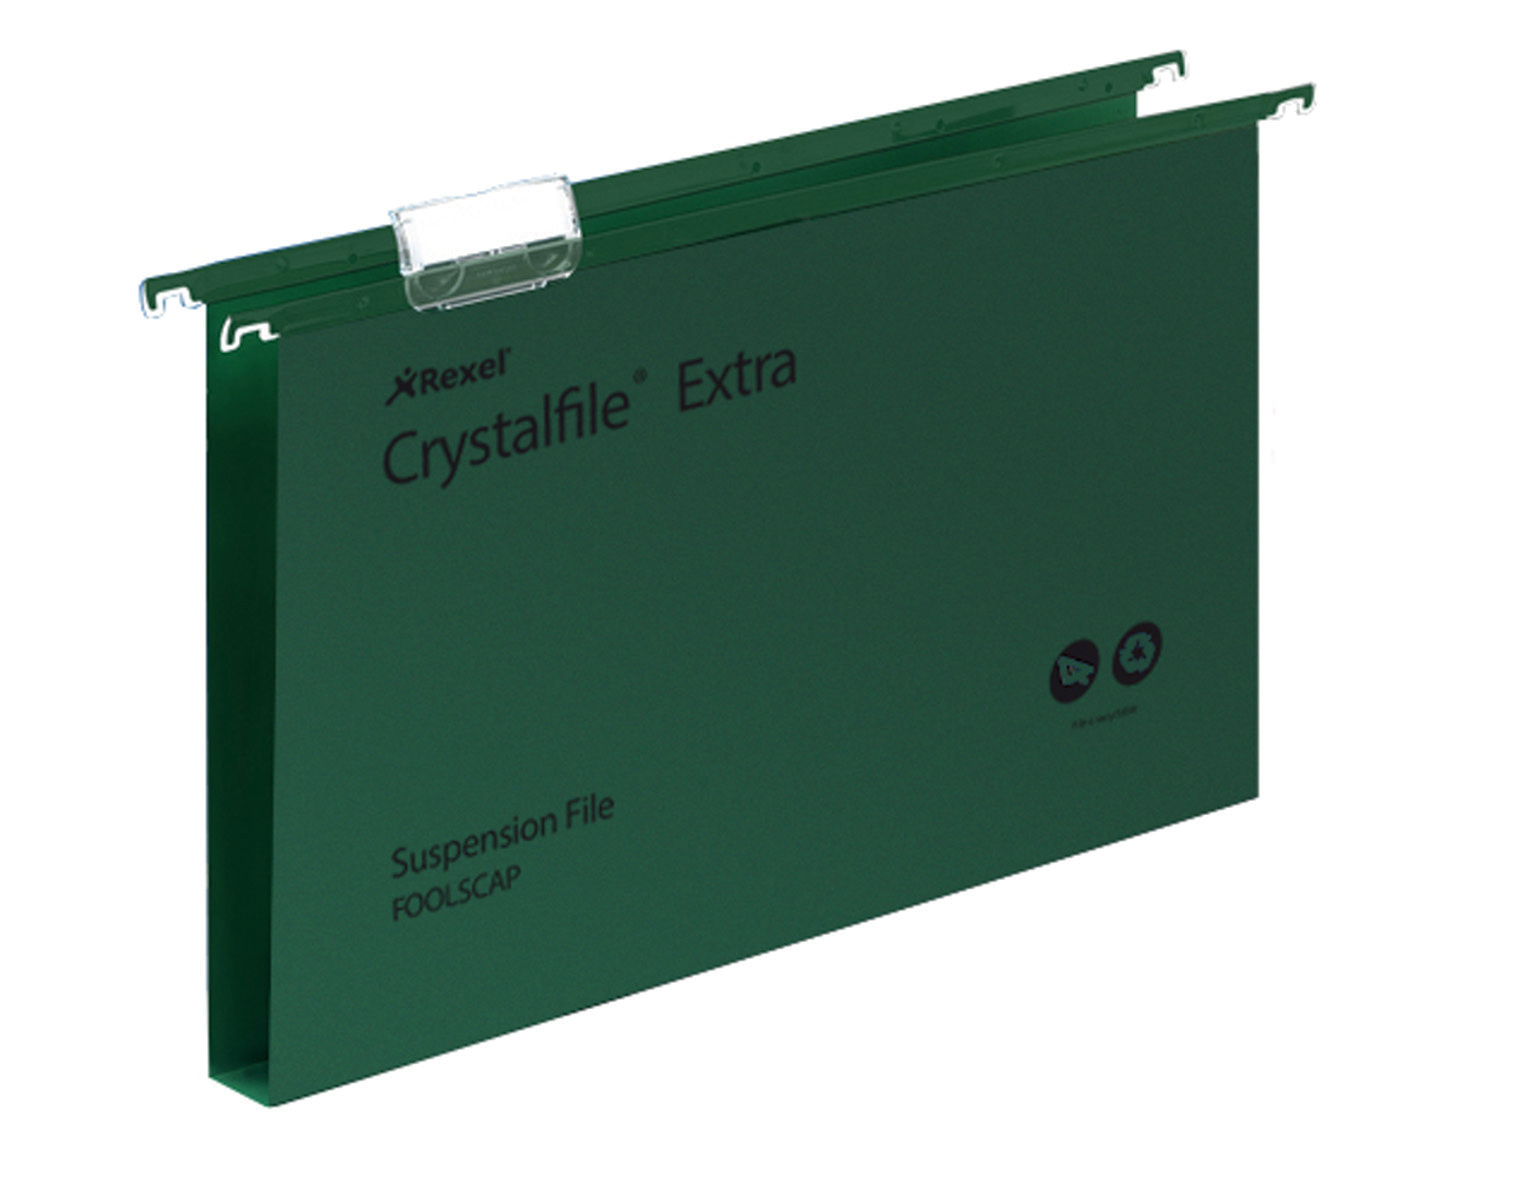 Rexel Crystalfile Extra Foolscap Suspension File Polypropylene 30mm Green (Pack 25)